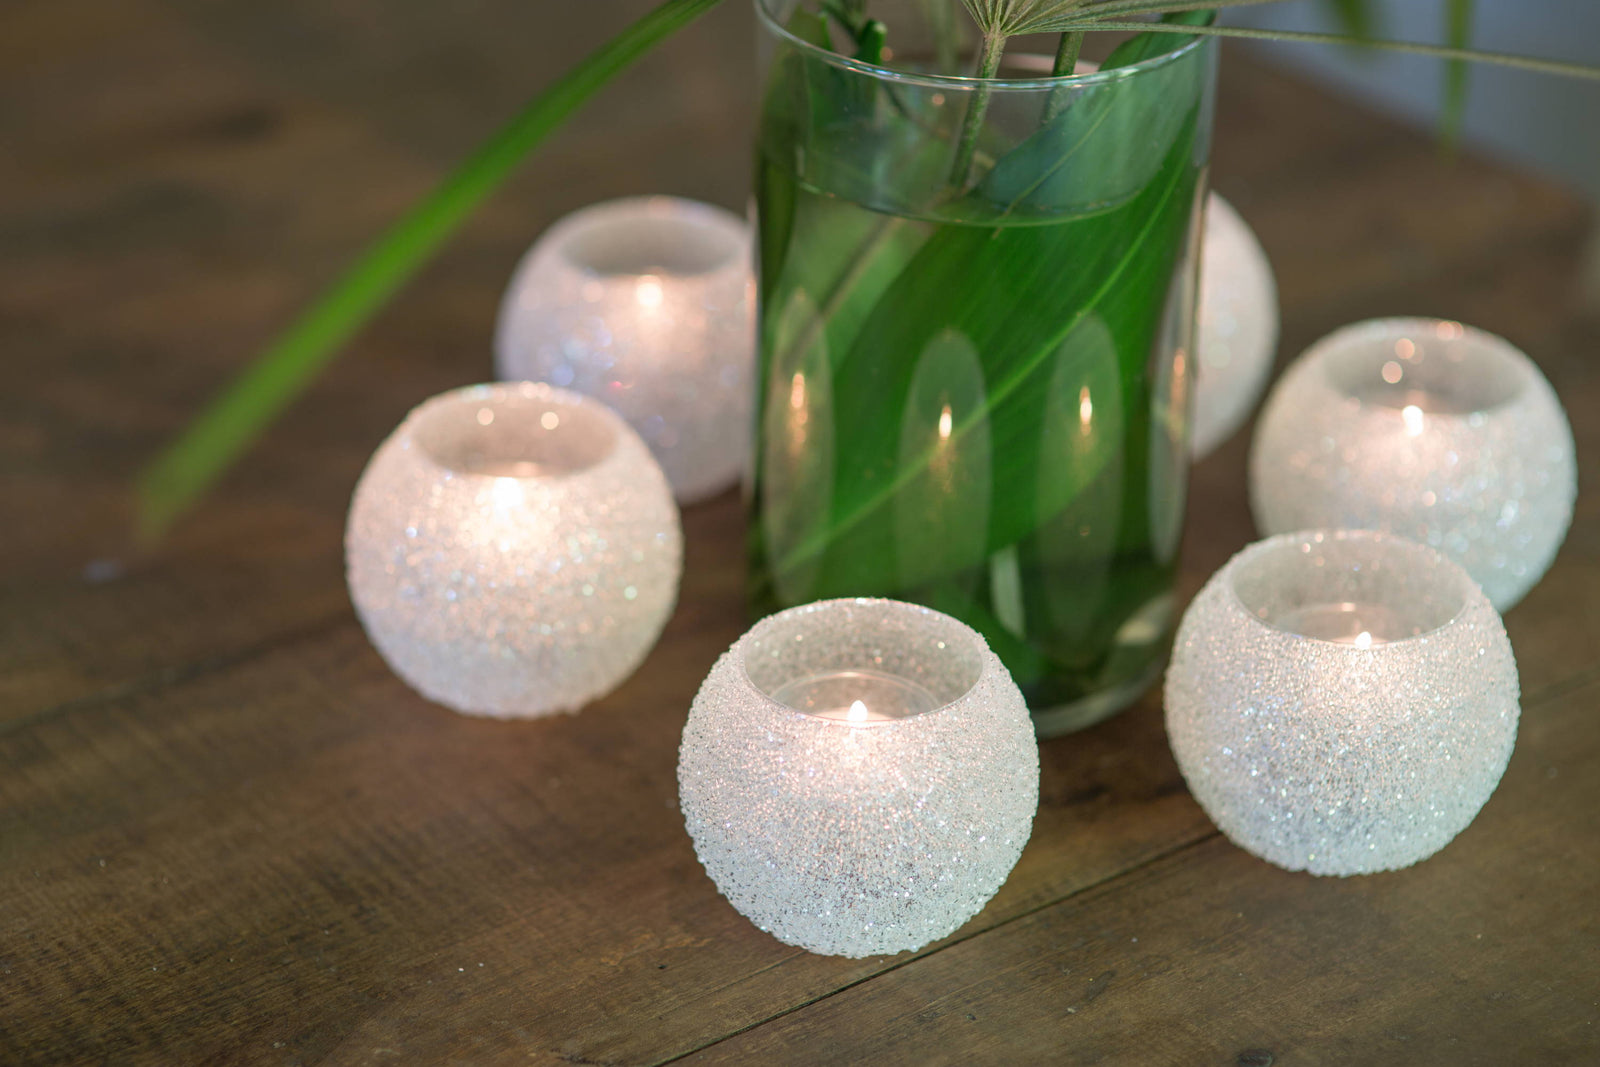 Need To Get Wax Out of Candle Holders? Here Are 3 Easy Tricks